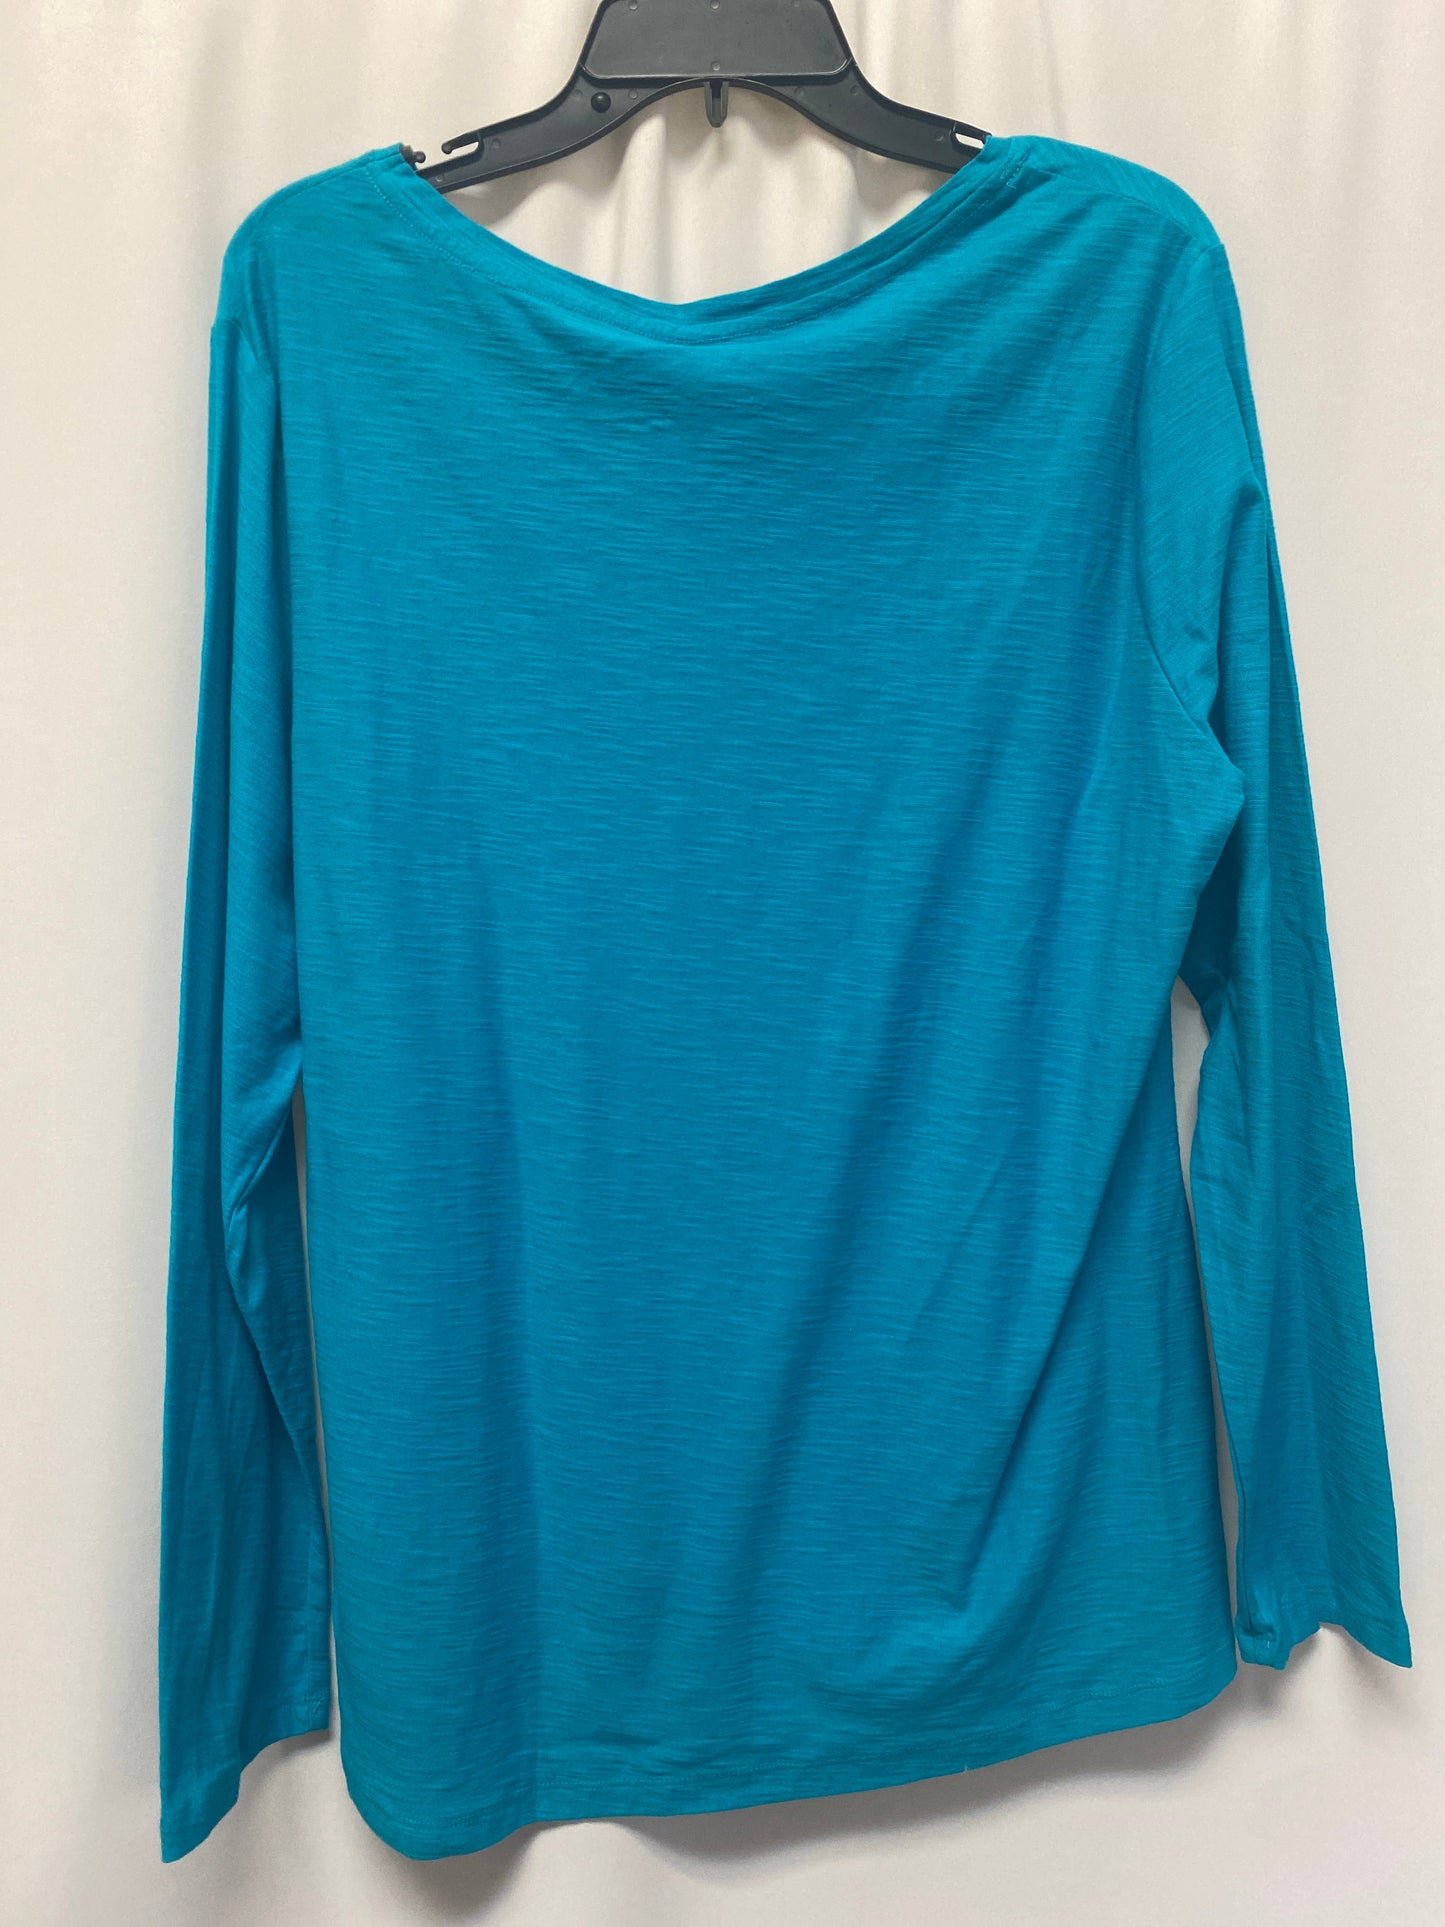 Teal Top Long Sleeve Faded Glory, Size Xxl